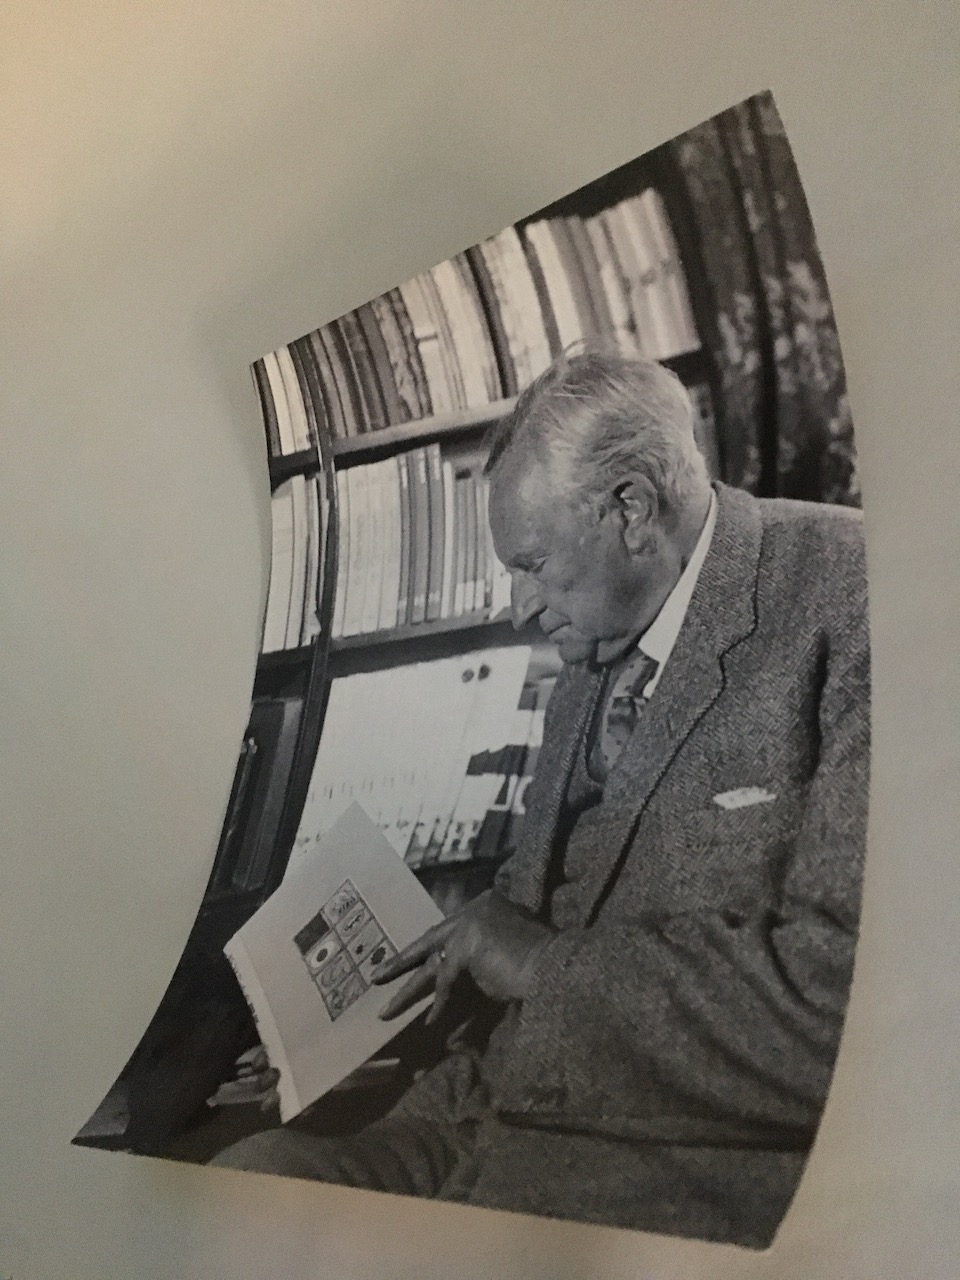 Exclusive Photographic Print: J.R.R. Tolkien in his study looking at Japanese Edition of one of his books